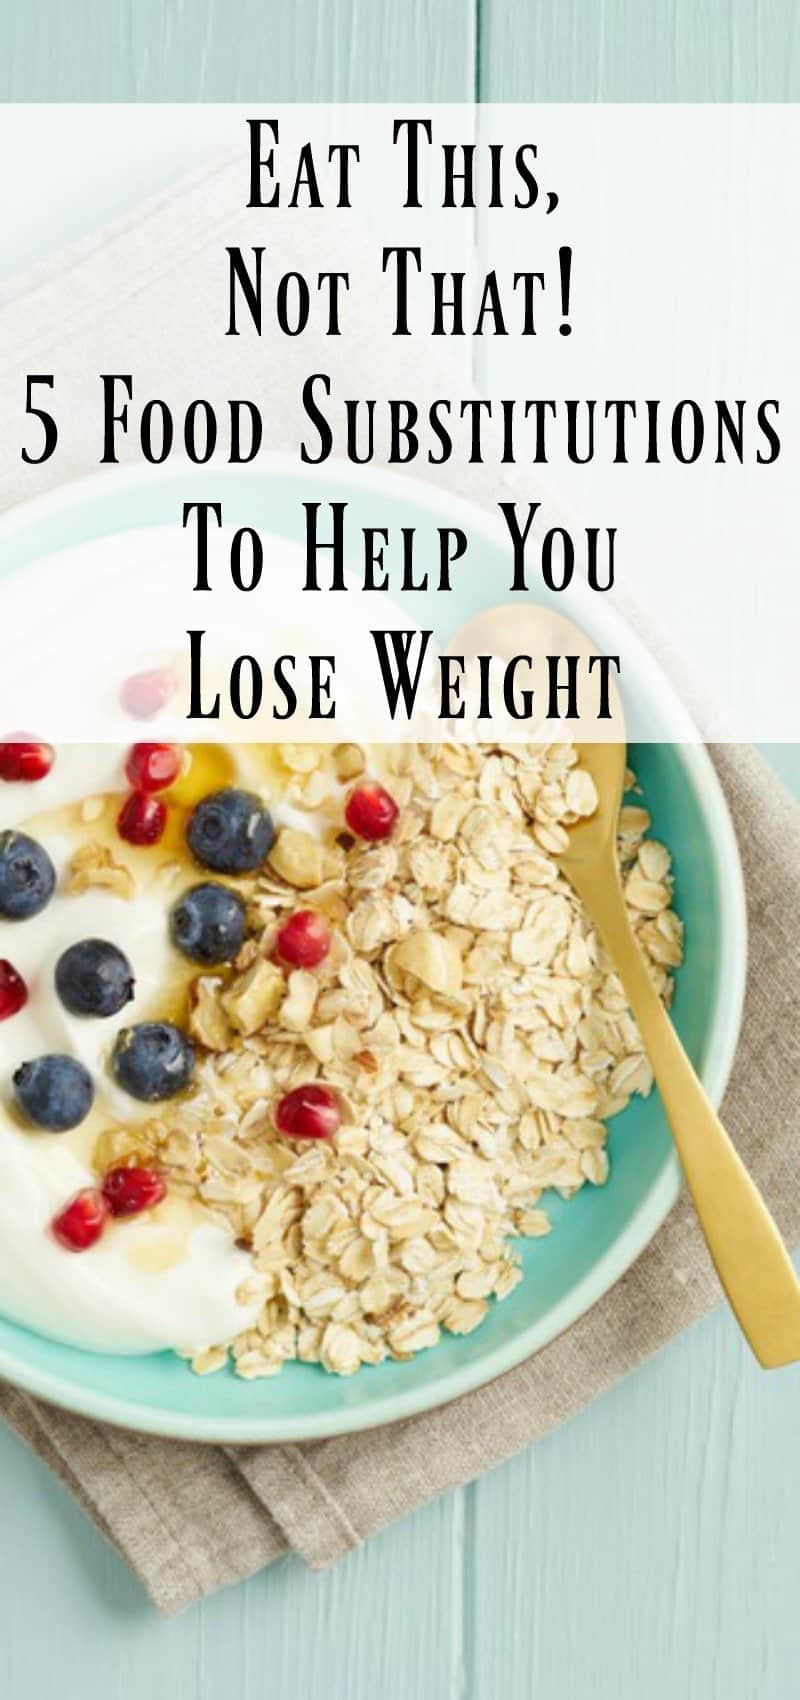 5 Food Substitutions to Help You Lose Weight - Organize Yourself Skinny